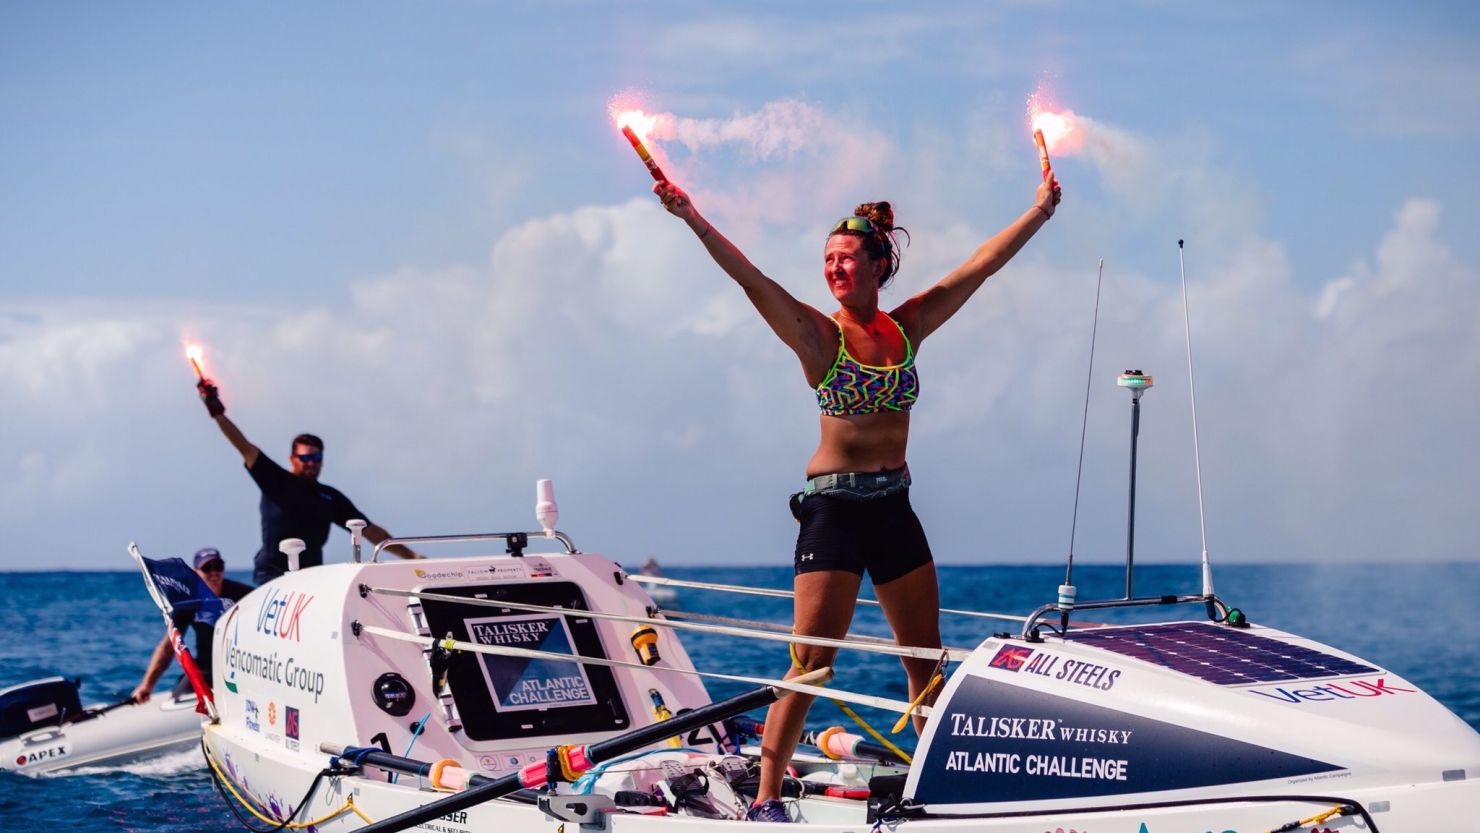 Jasmine Harrison, 21, completed the Atlantic Ocean crossing in 70 days, 3 hours and 48 minutes.